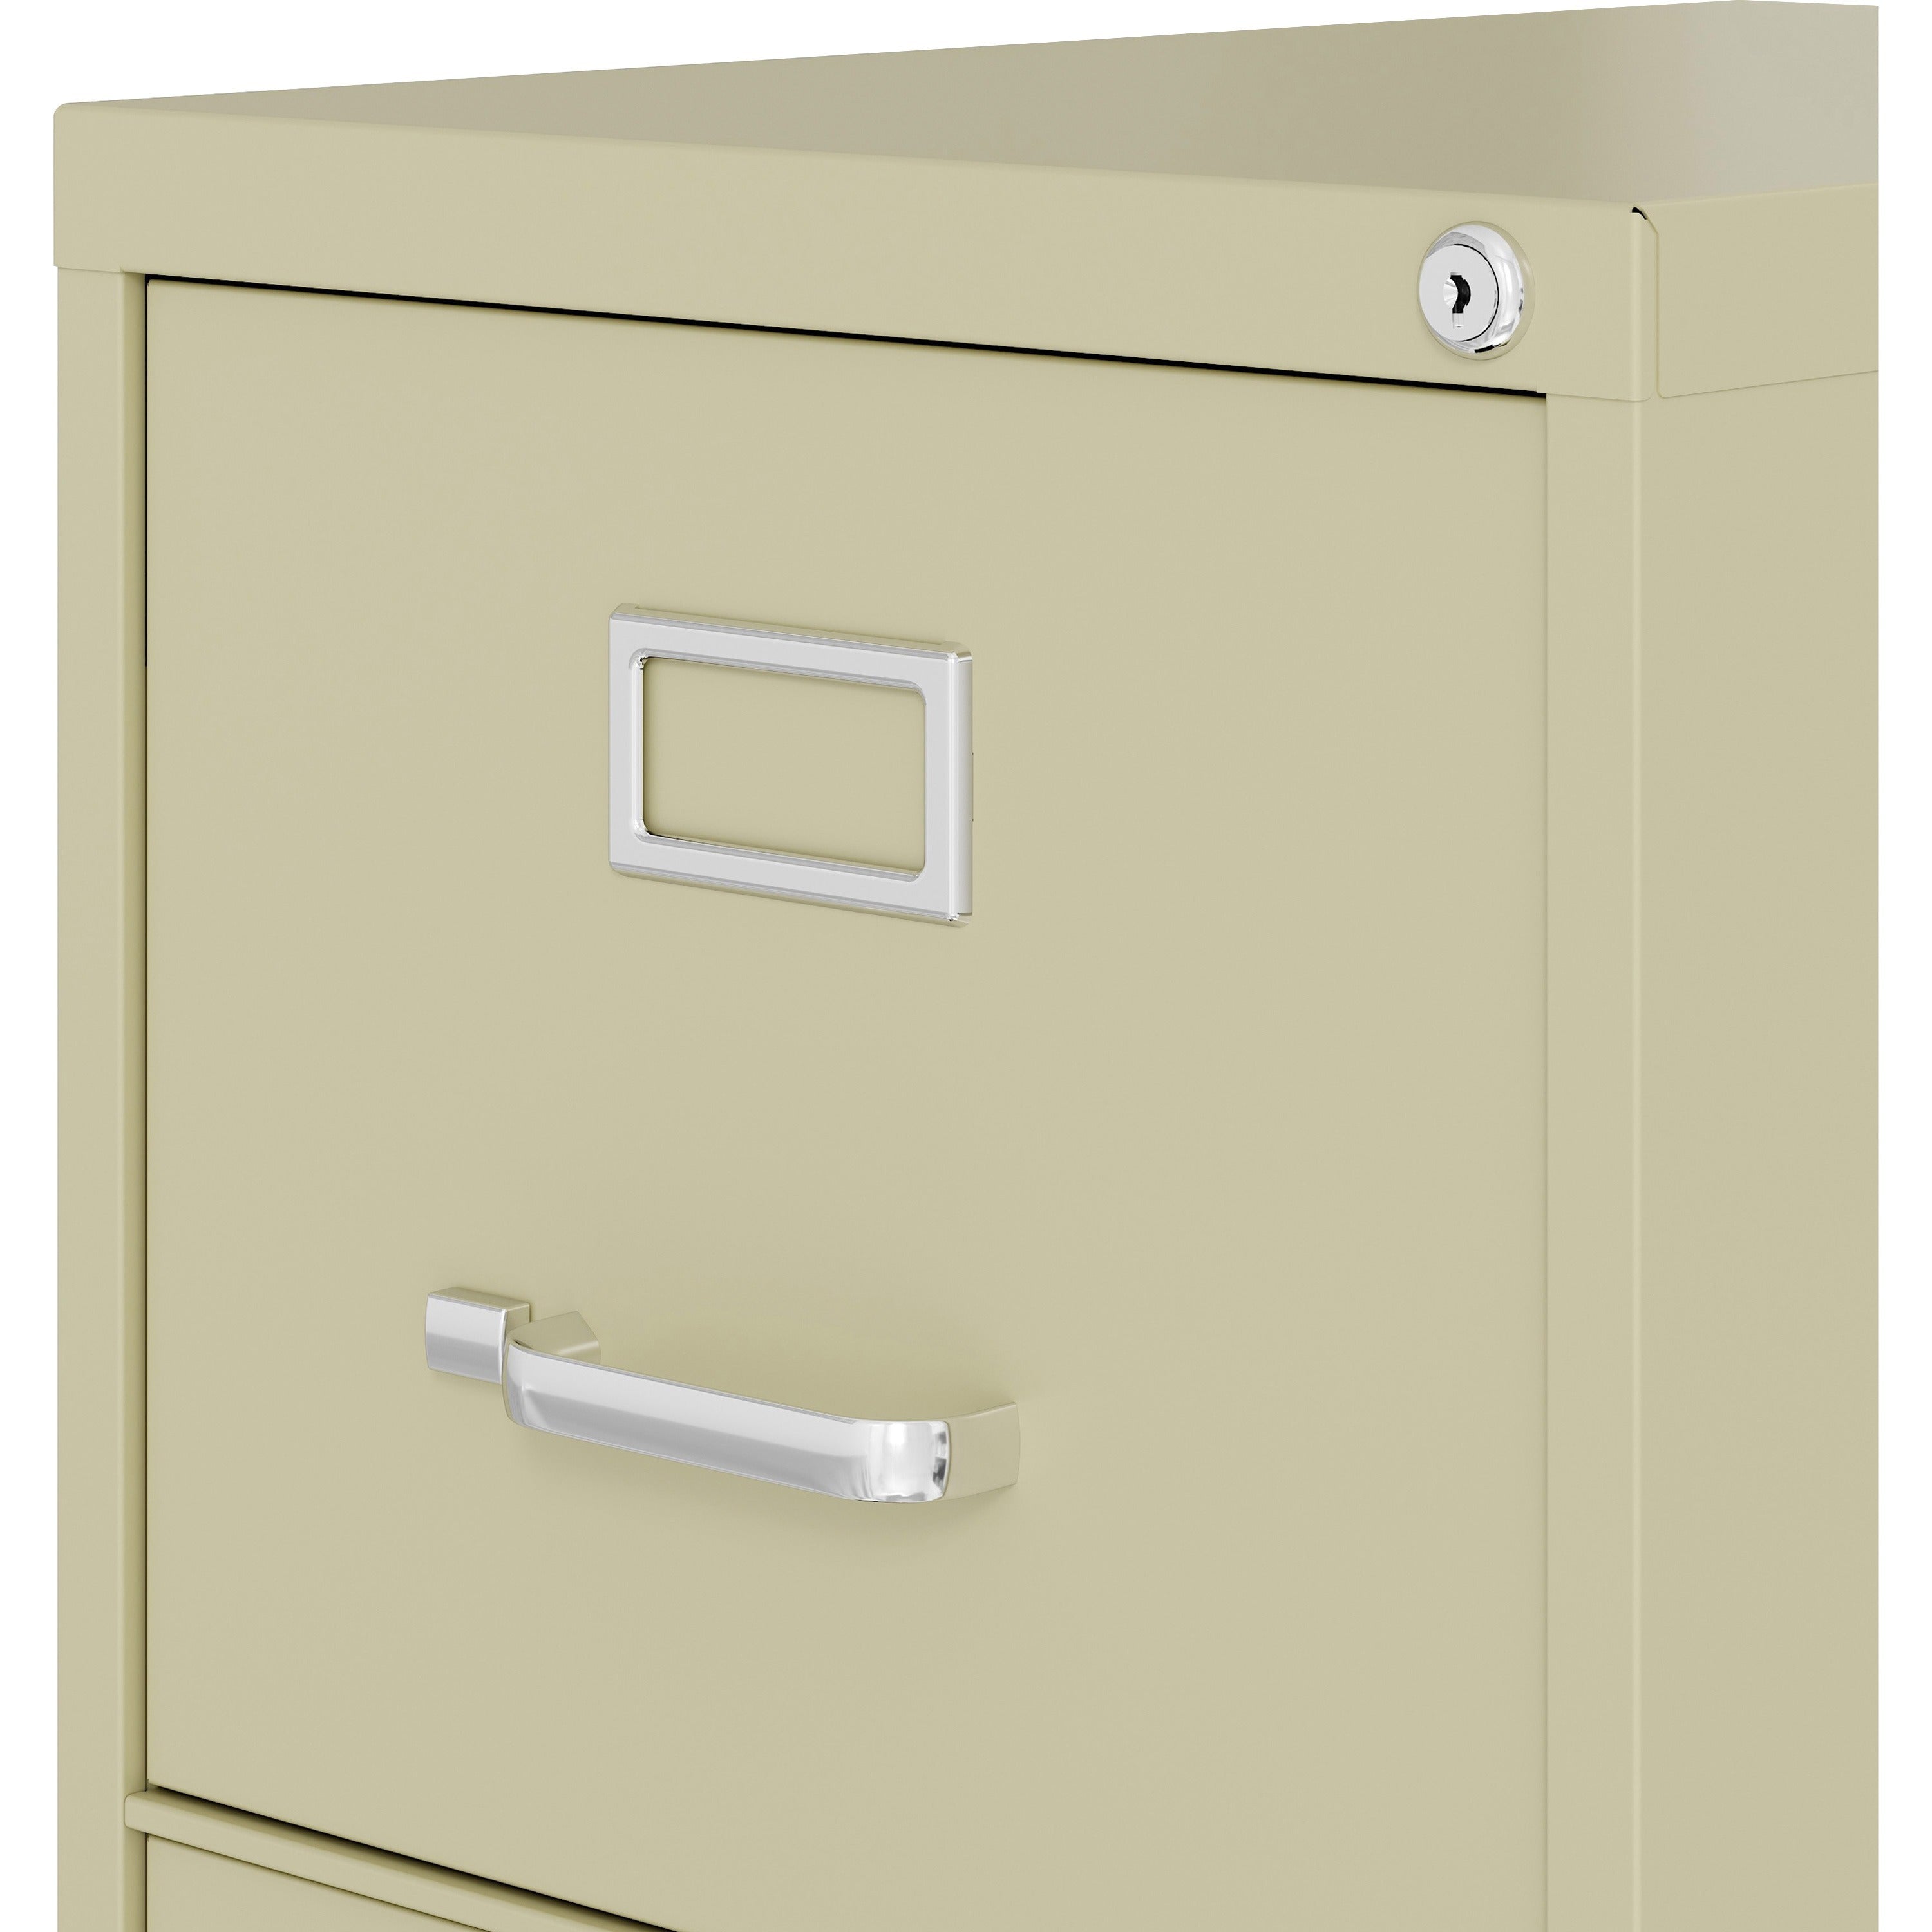 lorell-fortress-series-22-commercial-grade-vertical-file-cabinet-15-x-22-x-402-3-x-drawers-for-file-letter-vertical-ball-bearing-suspension-removable-lock-pull-handle-wire-management-putty-steel-recycled_llr42296 - 5